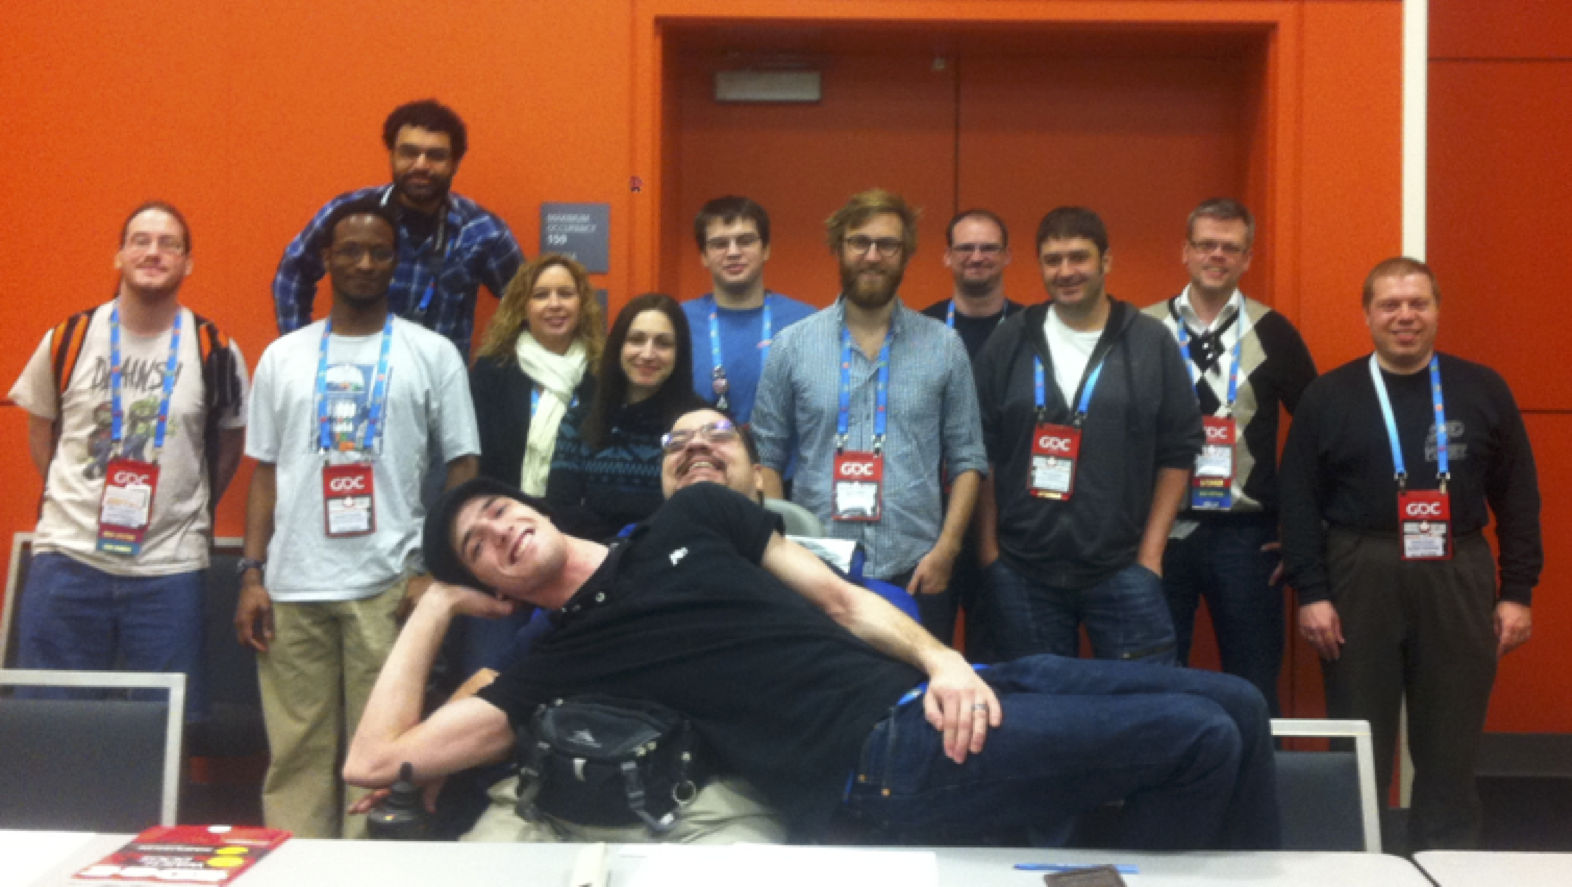 Attendants at the IGDA Game Accessibility SIG roundtable at GDC 2014